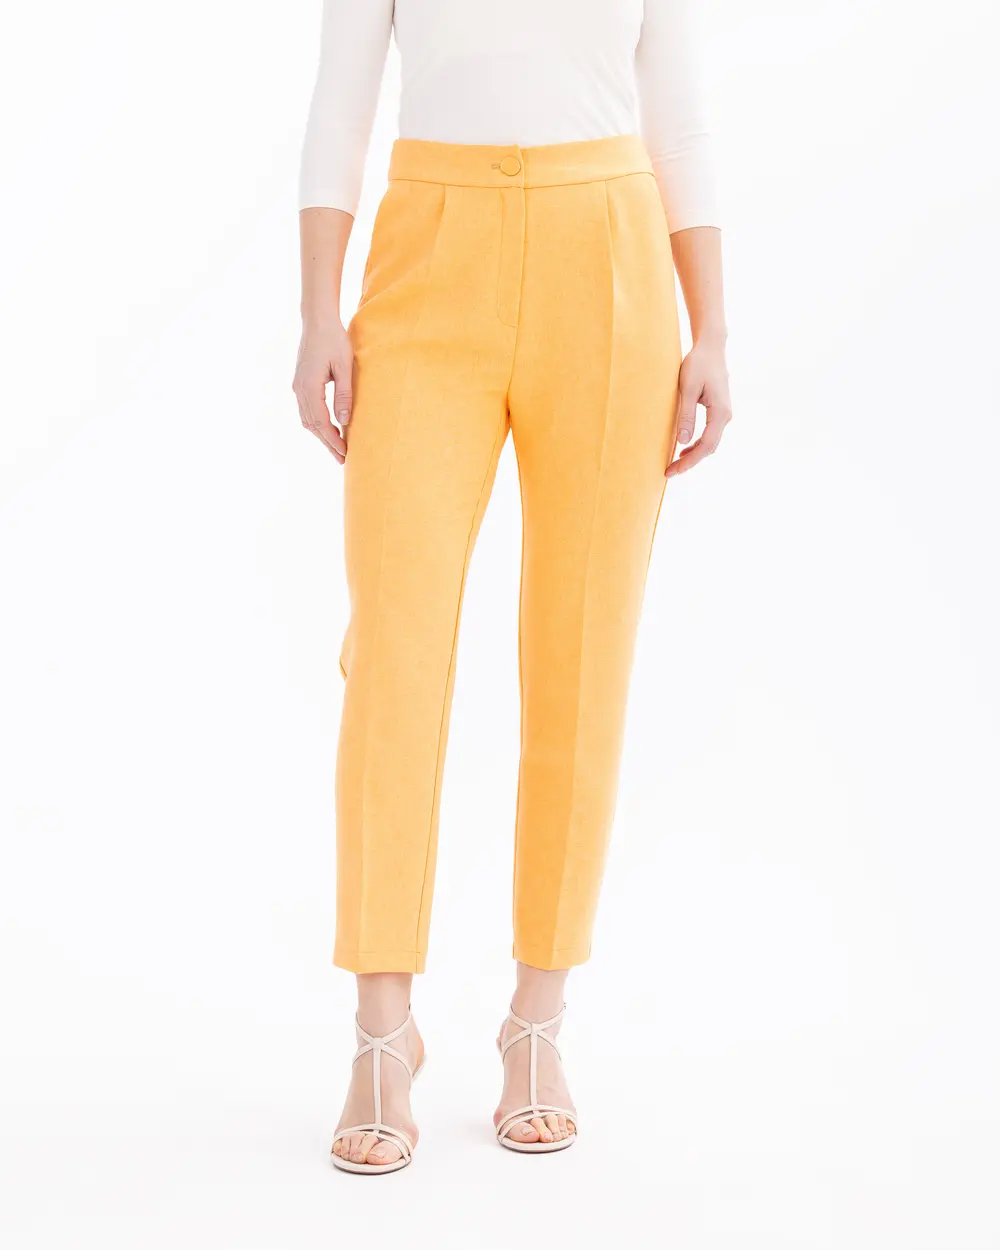 Ankle Length Pants with Pockets